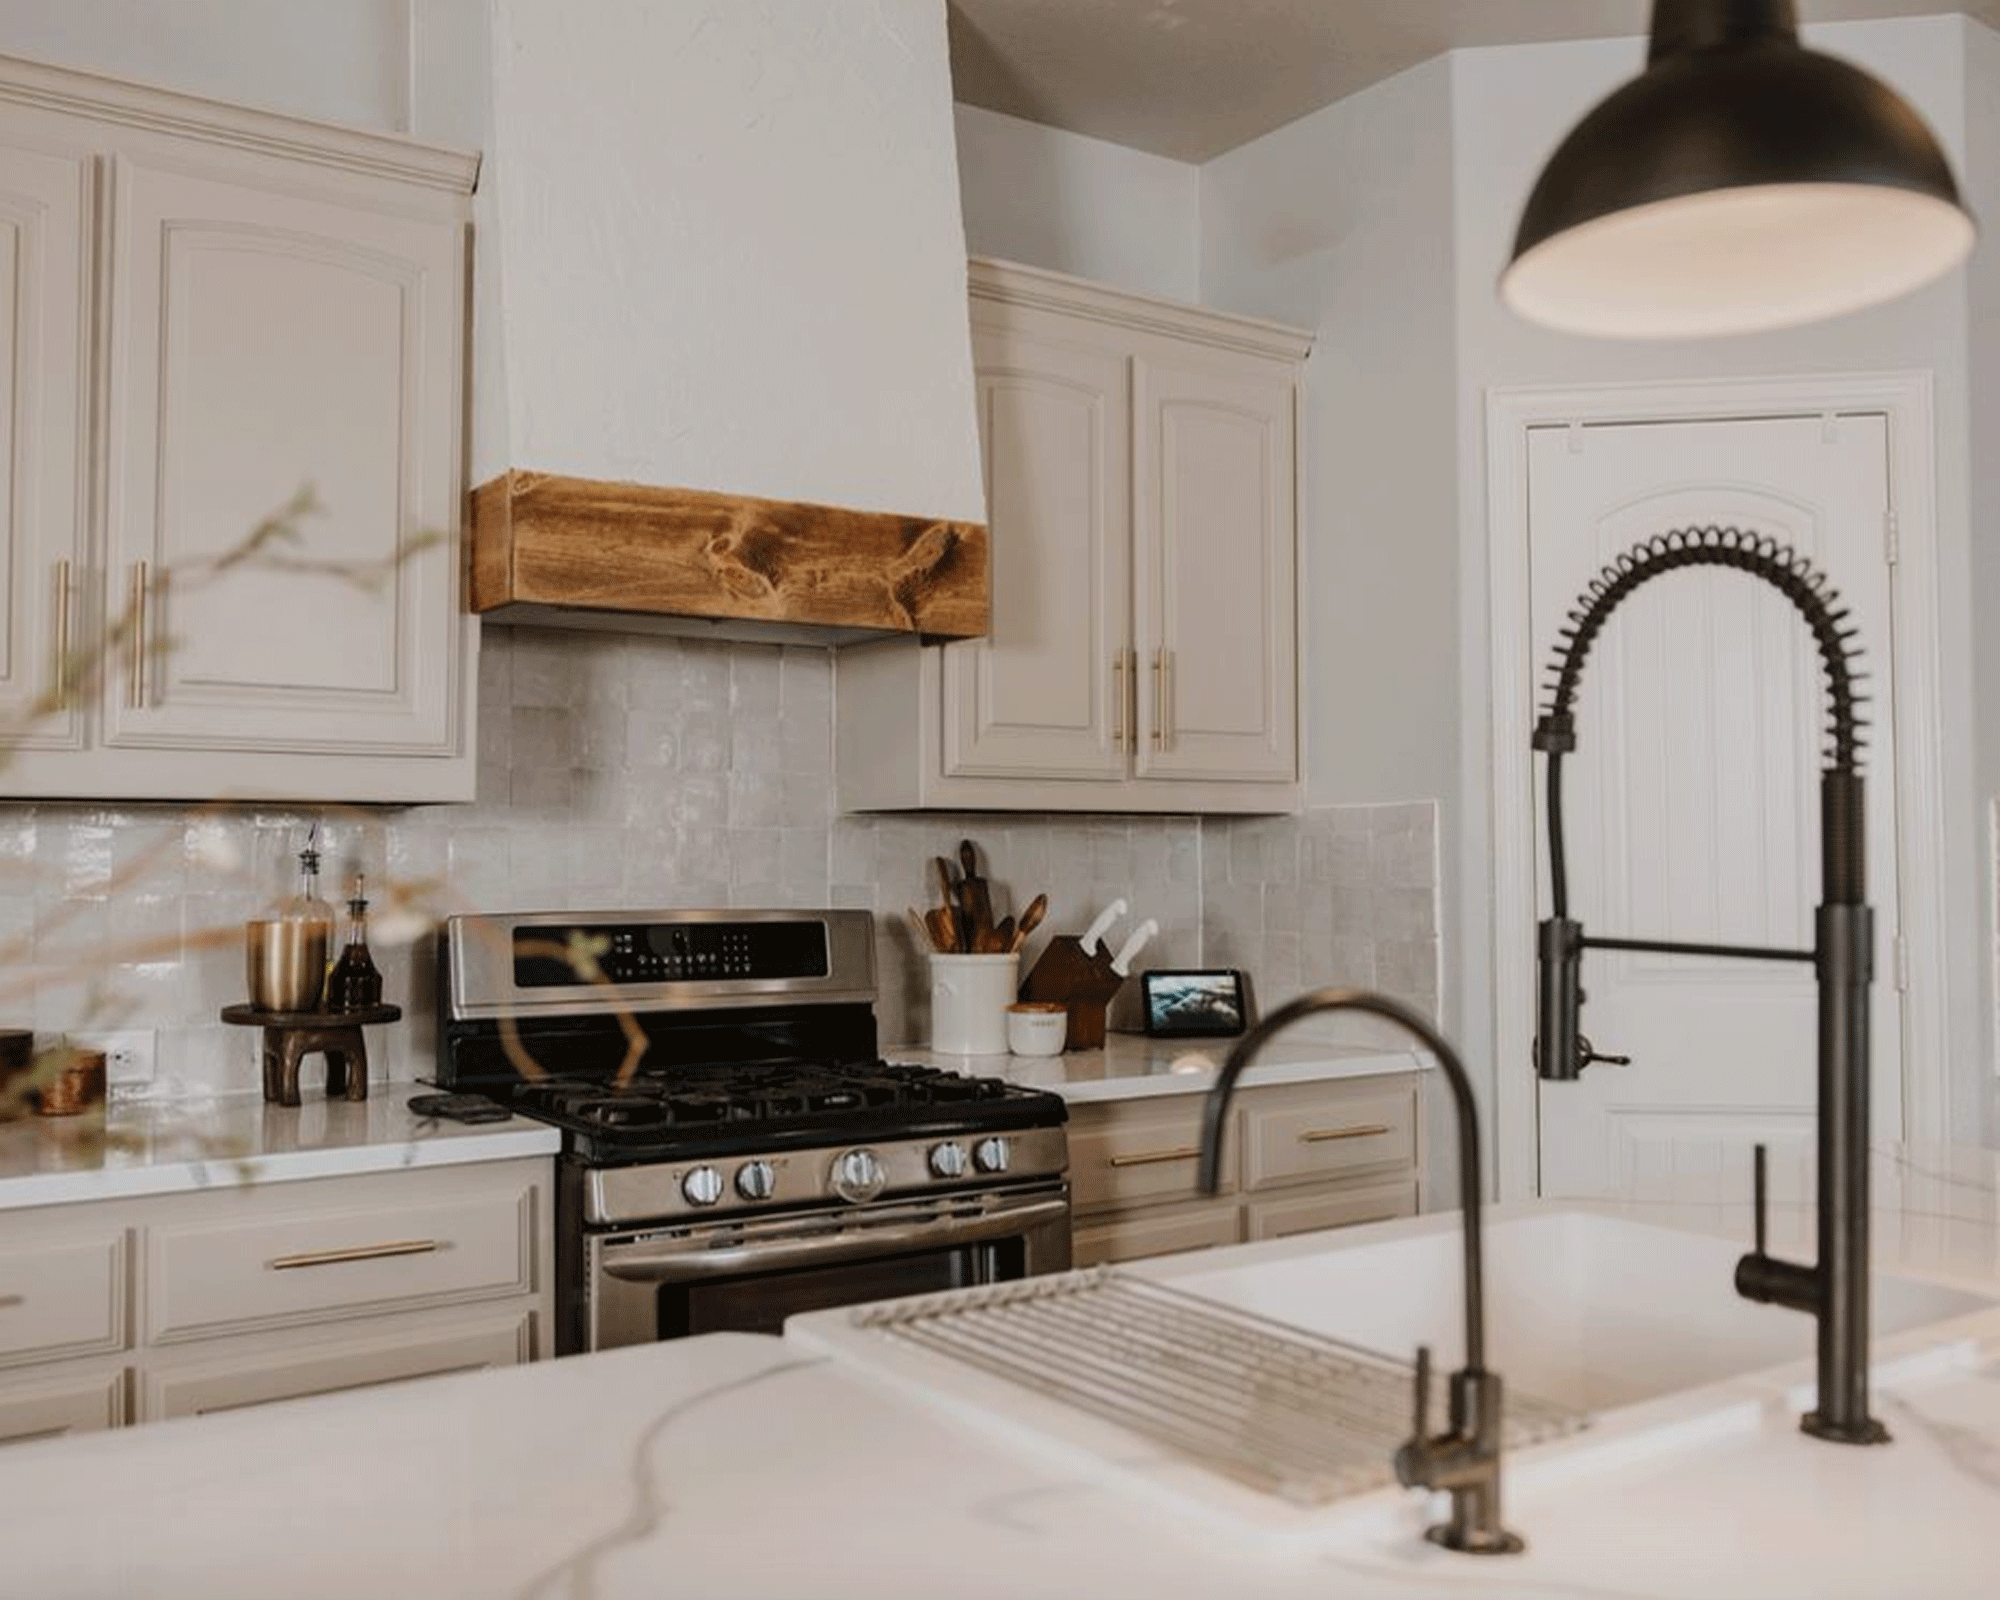 modern kitchen view with large white island with a sink and black taps on it, a stainless steel cooker, and extraction fan with wooden fringe